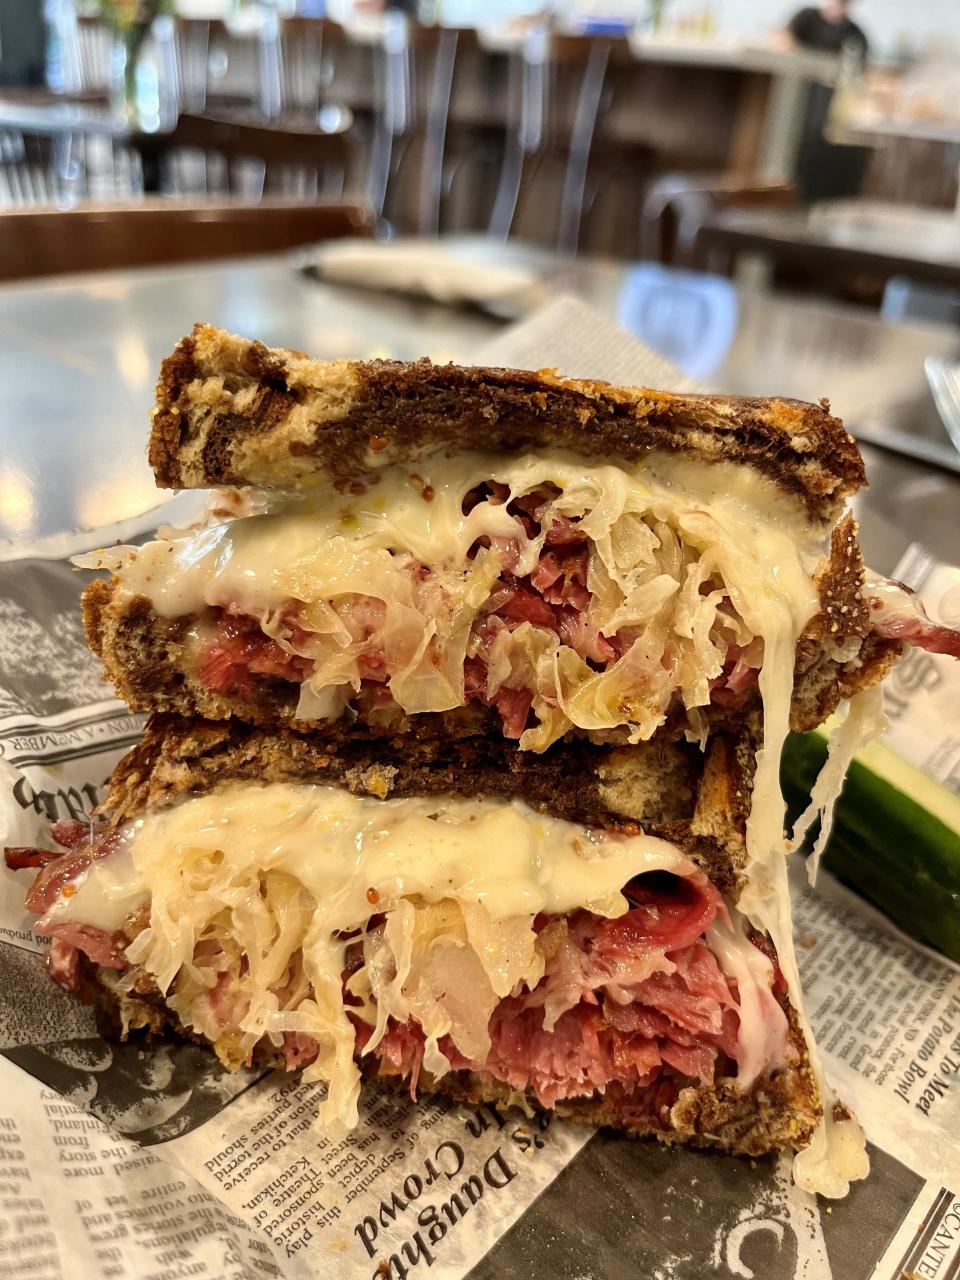 Artisan Eatery's New Yorker features house-made pastrami, lovingly layered with sauerkraut and Swiss cheese, with beer mustard aioli on marble rye.